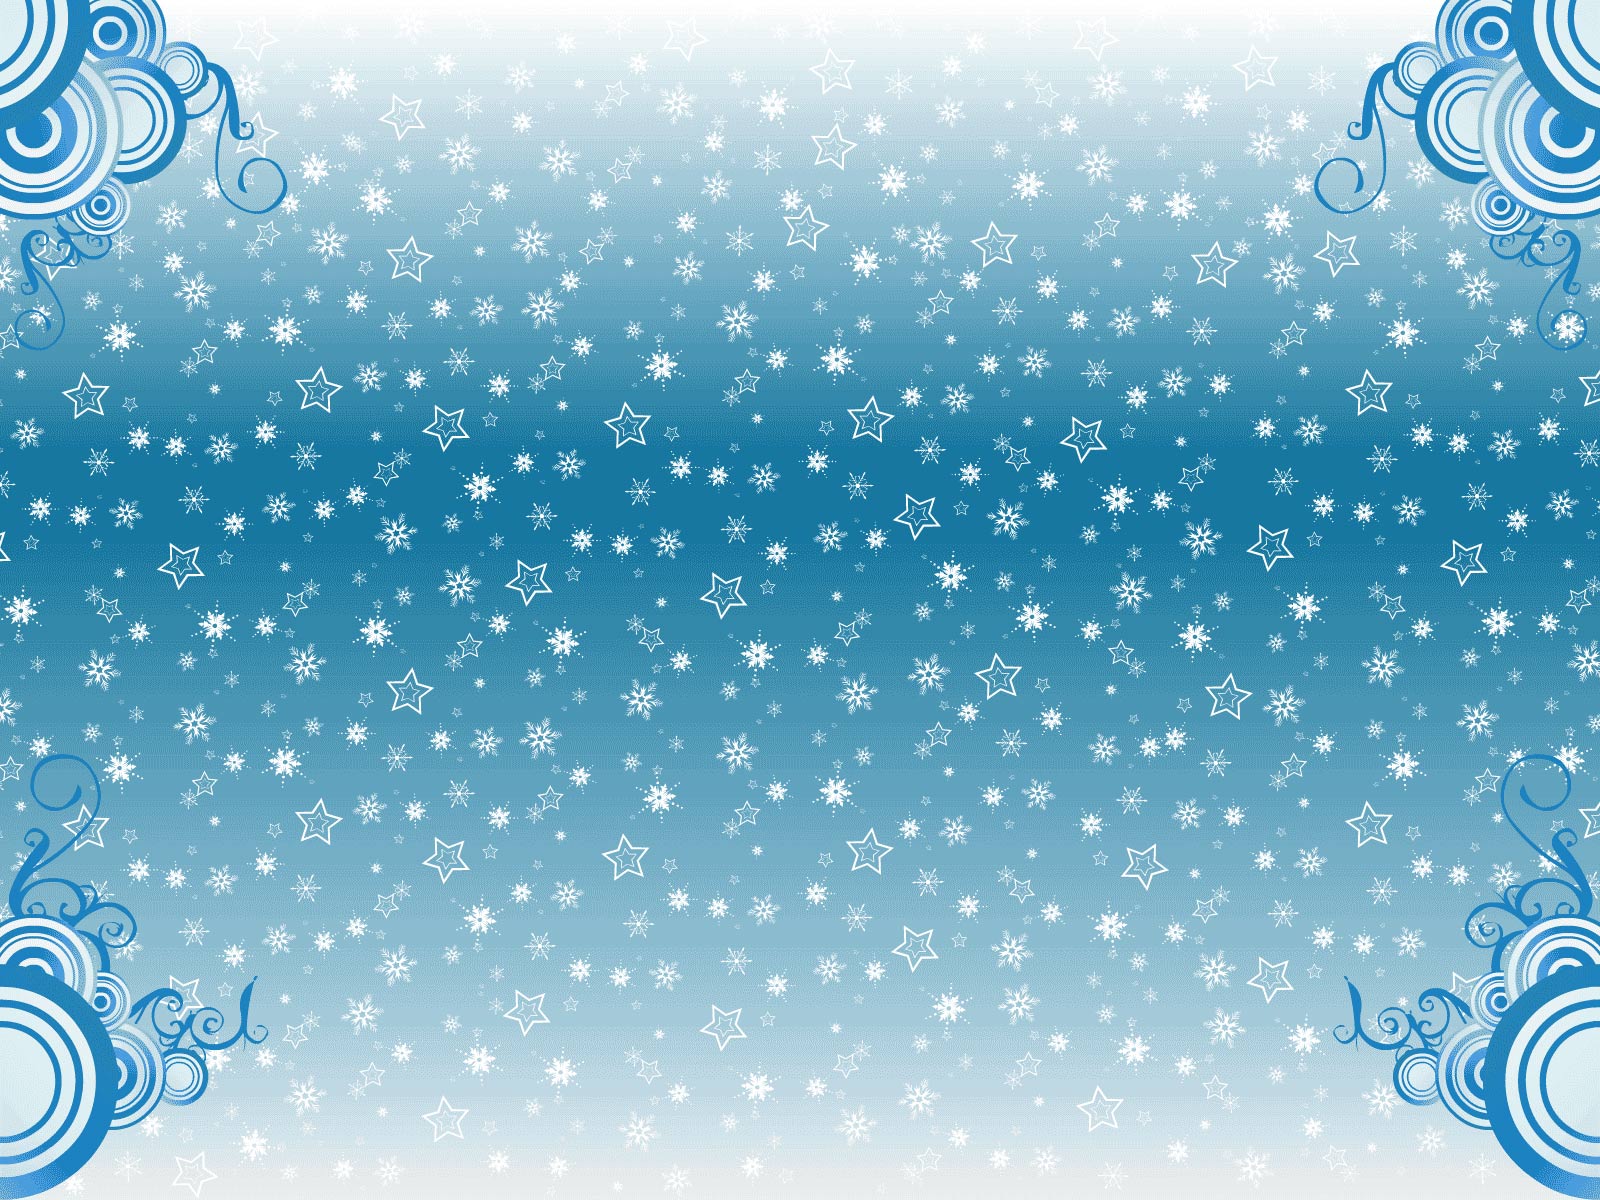 Background Winter Desktop and Make This For Your Clip Art